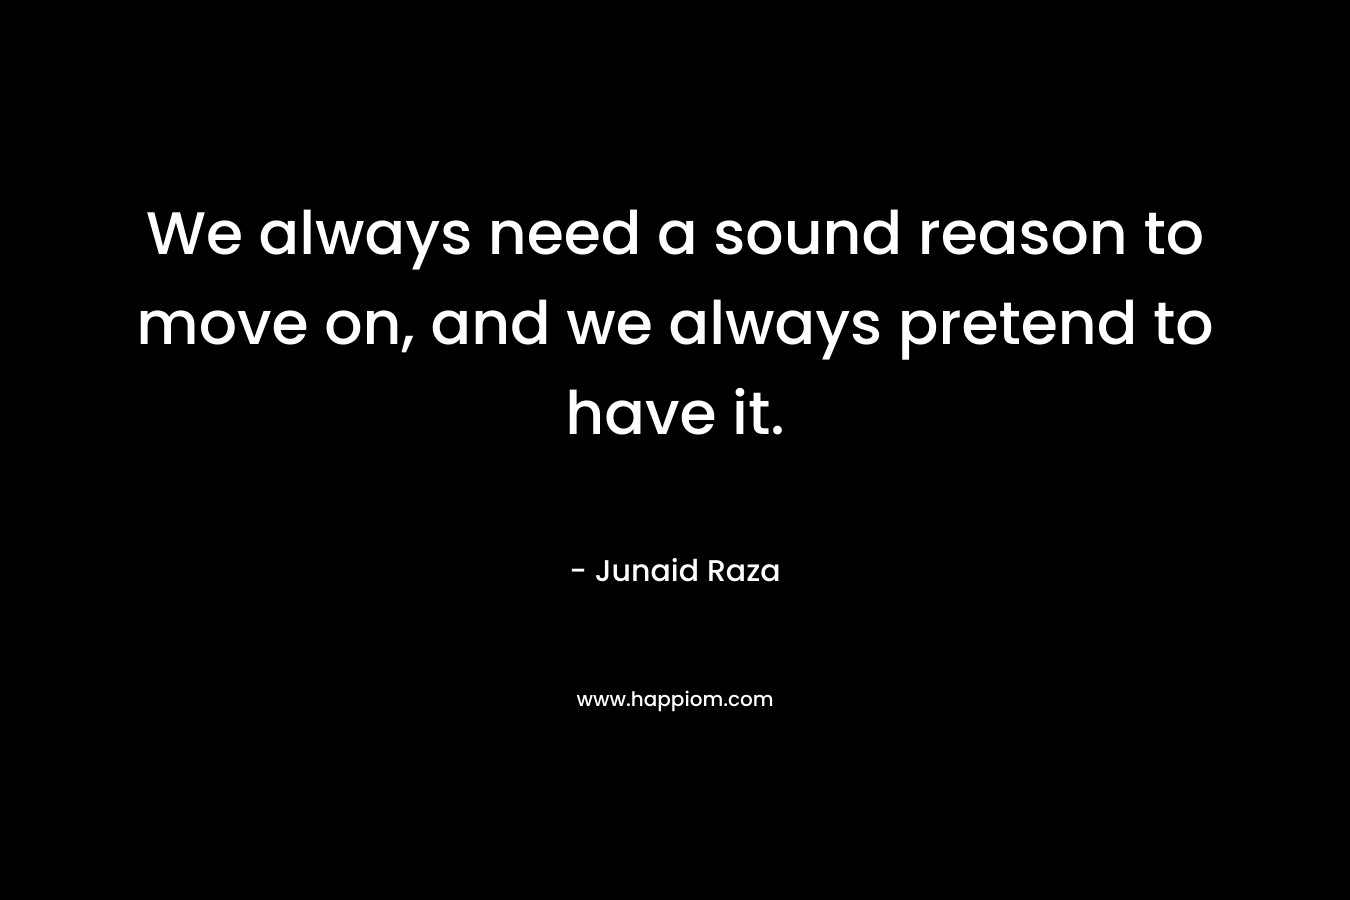 We always need a sound reason to move on, and we always pretend to have it.